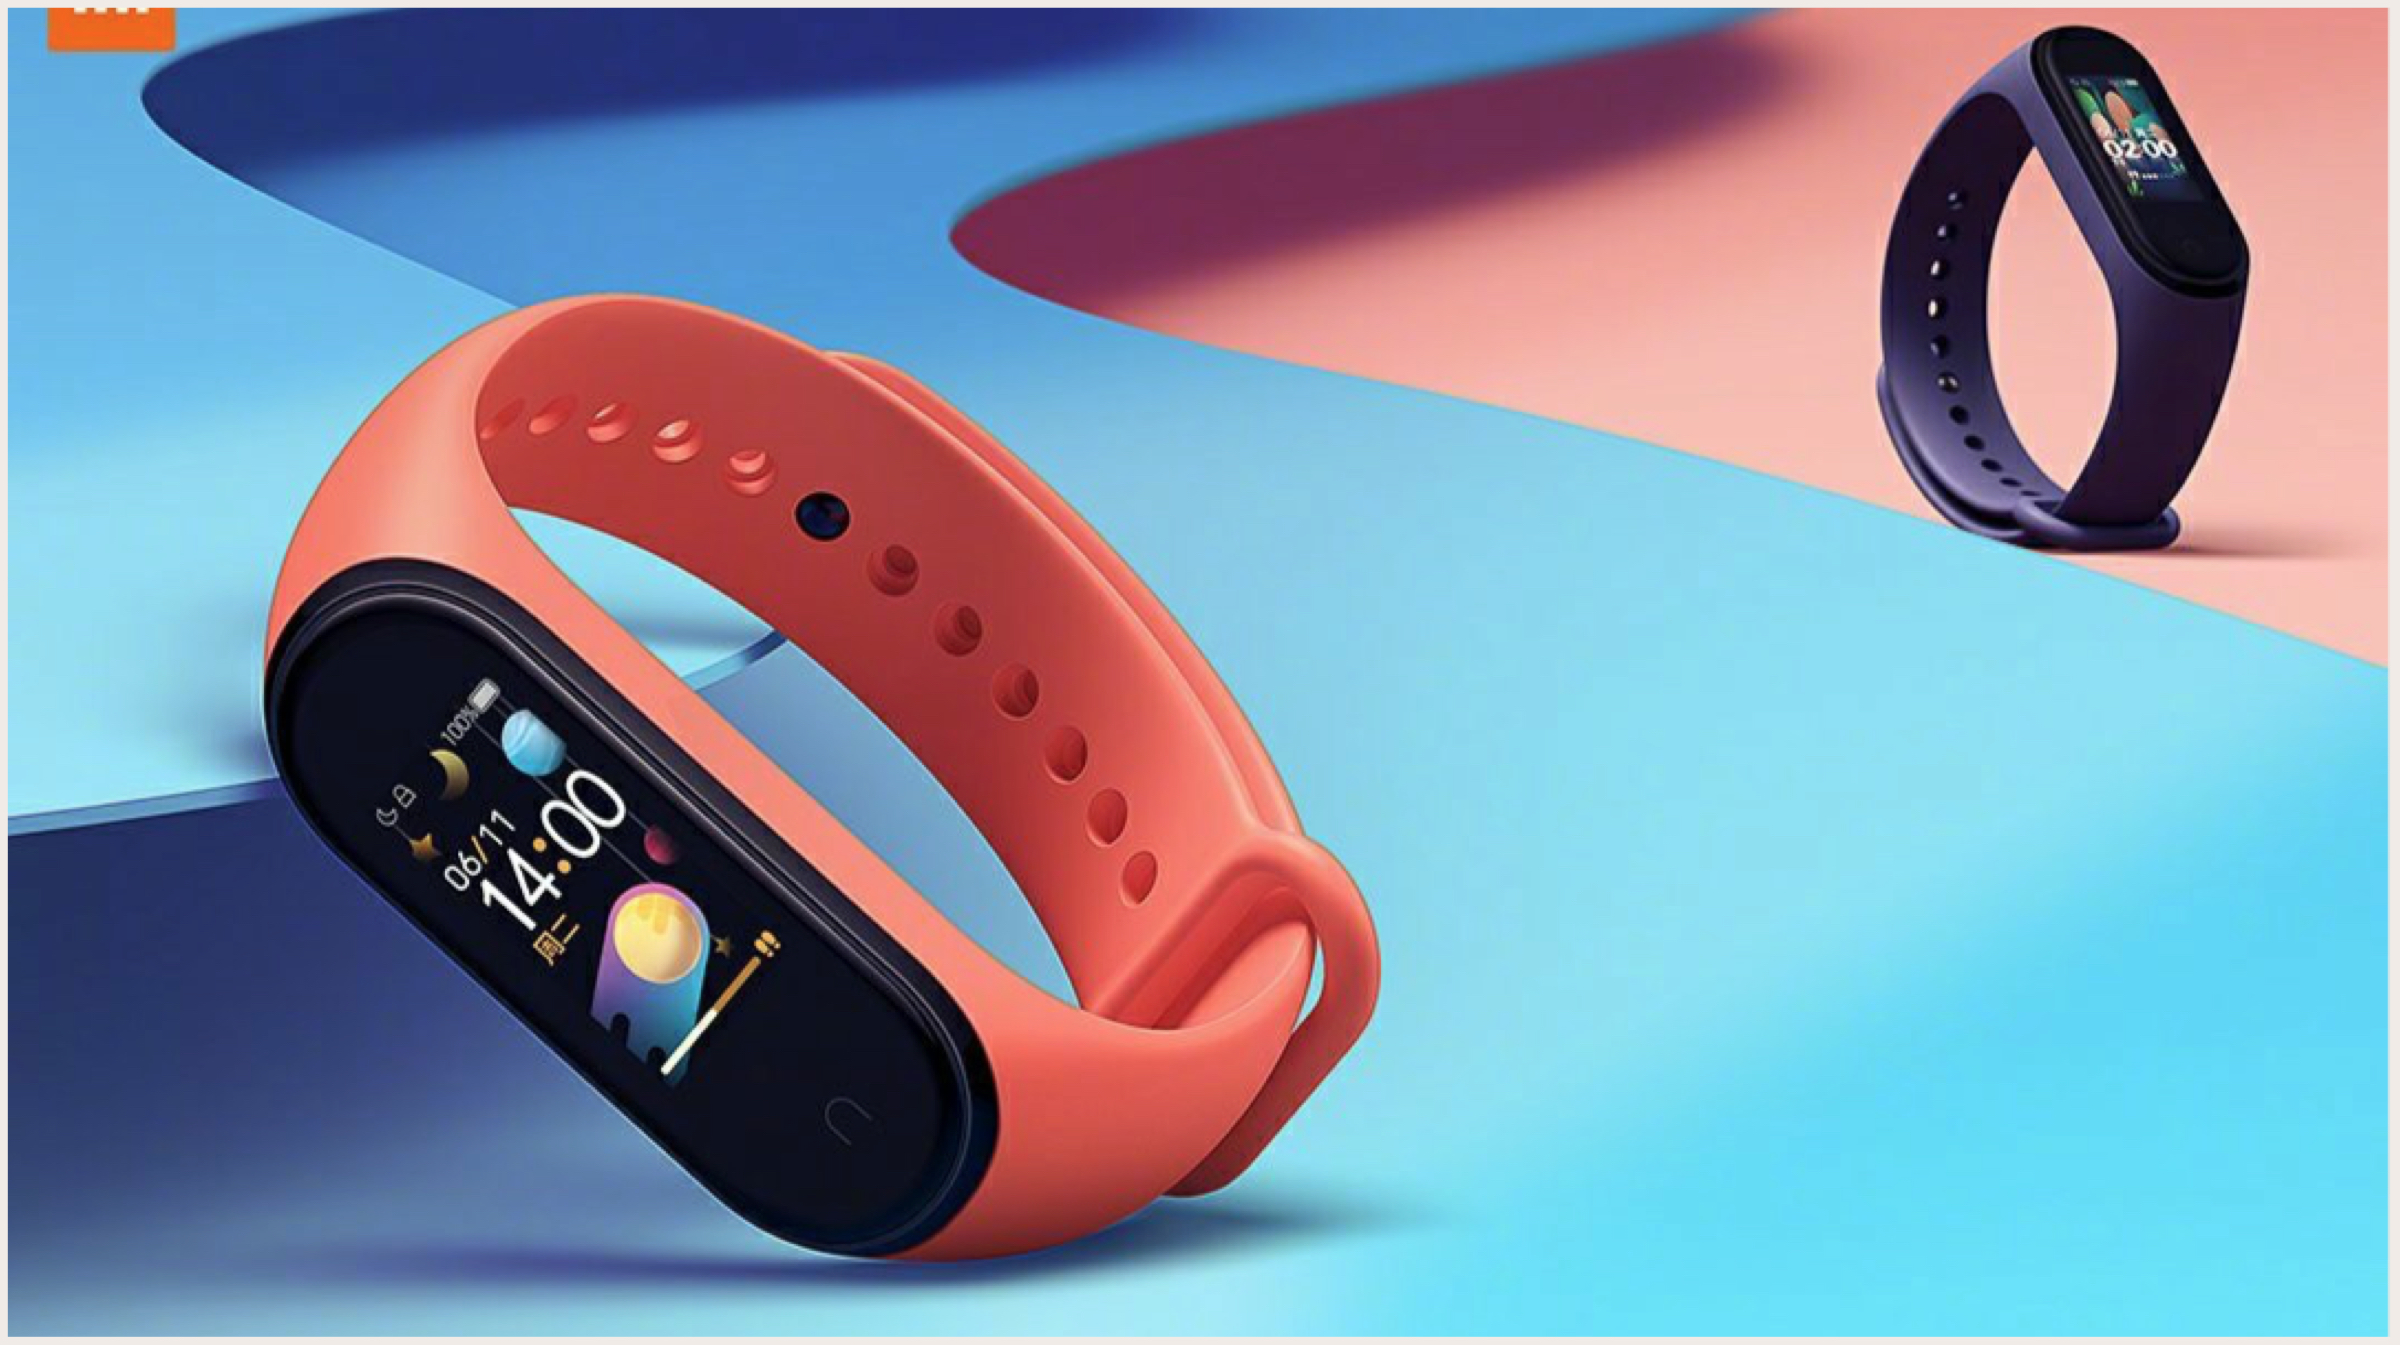 Xiaomi Mi Band 4 Wearable Launched, Price & Features | iGyaan Network